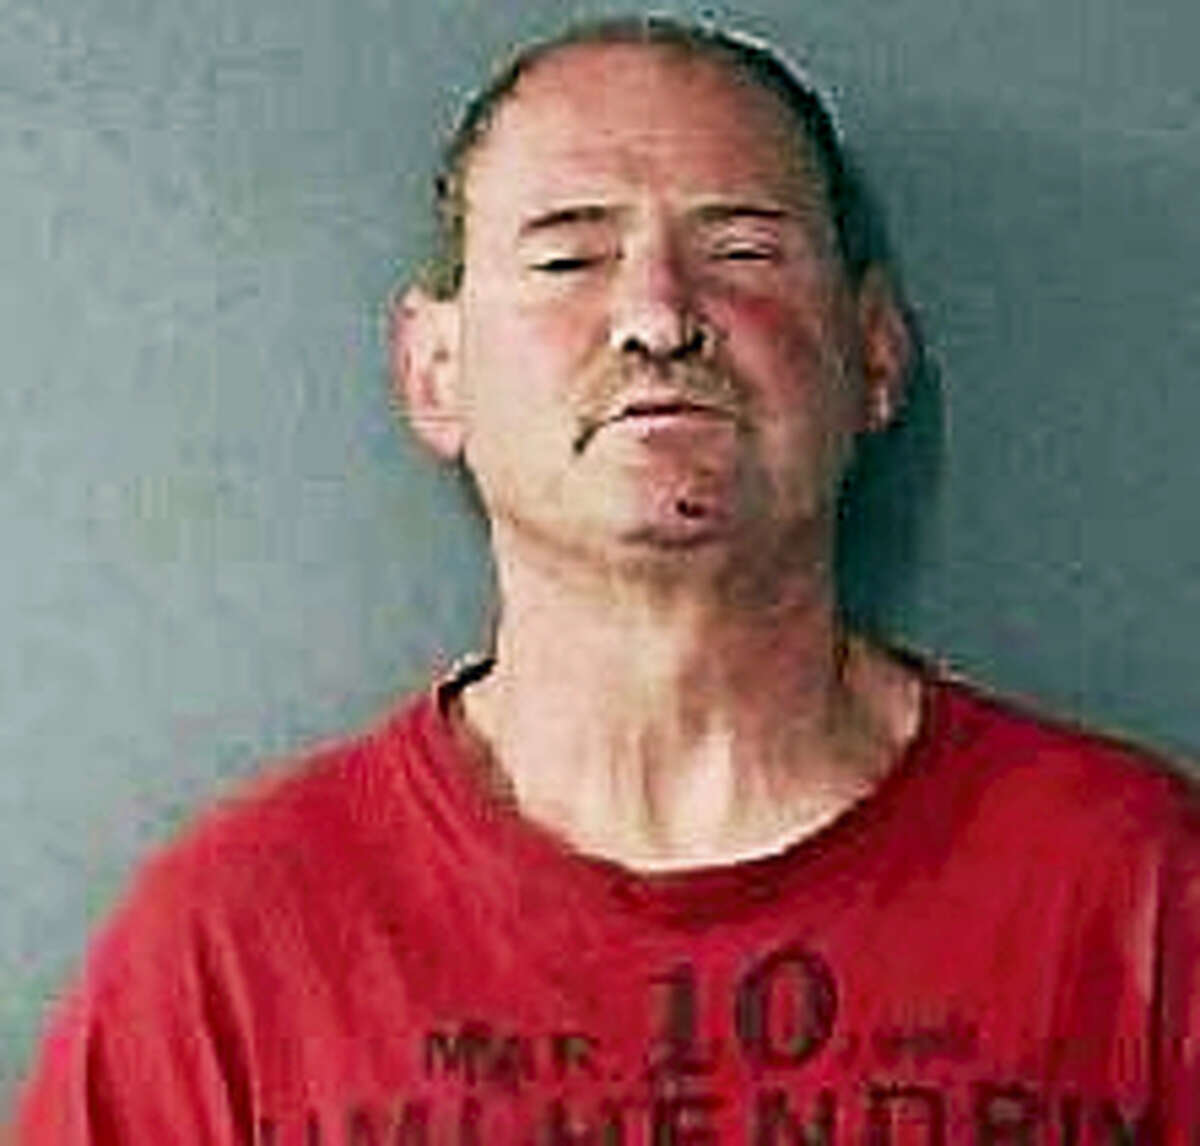 Robert Murphy, 56, was arrested Thursday after police say he attacked a woman and held her at knifepoint.